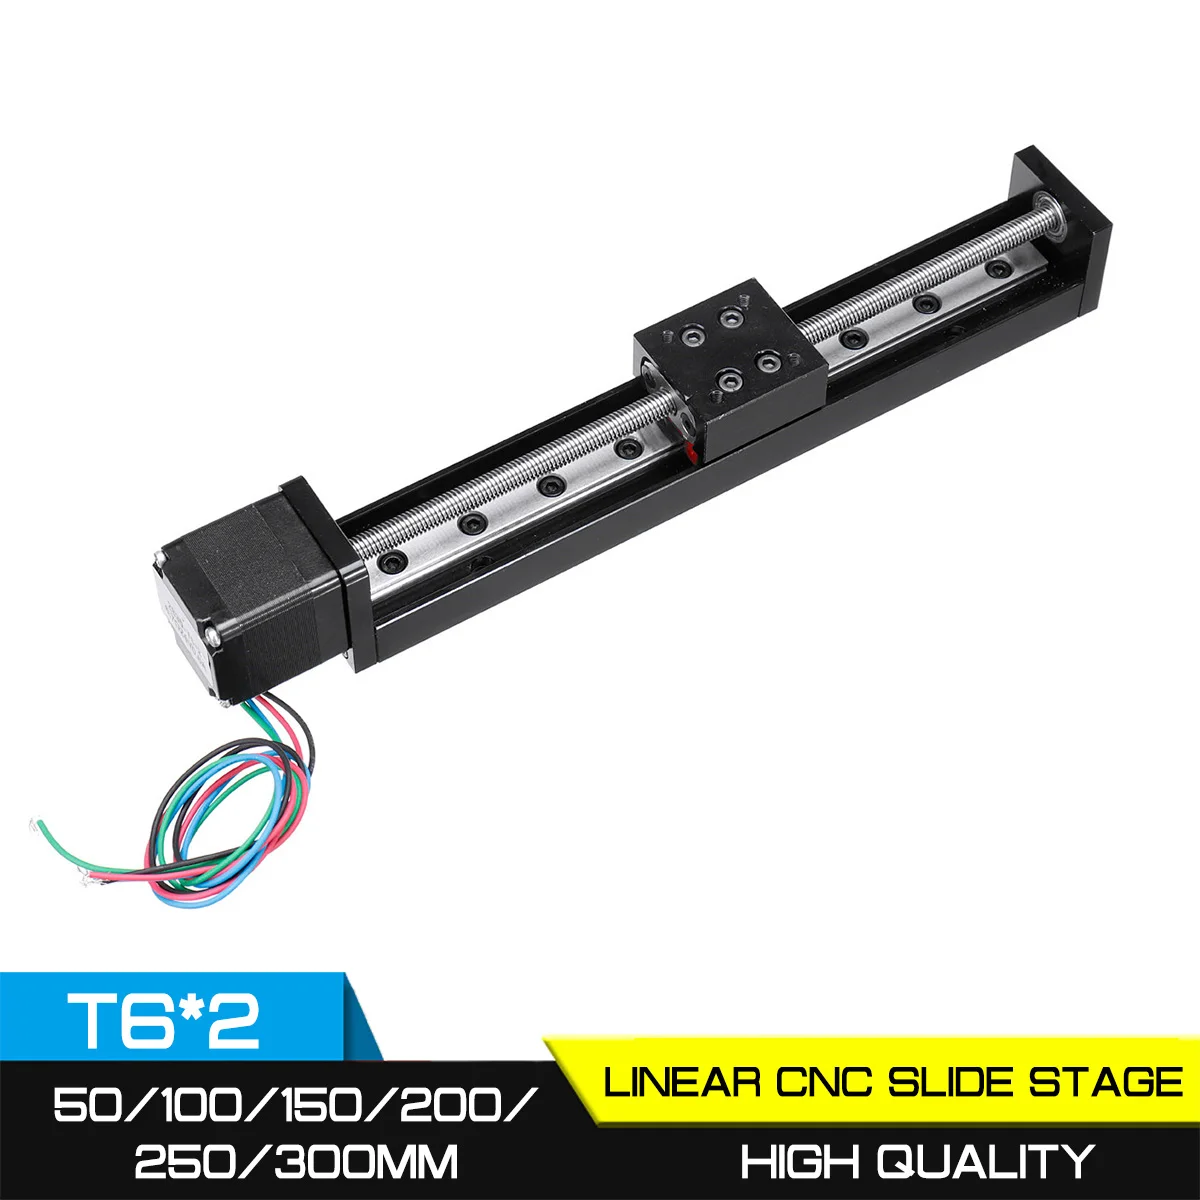 

For 3D Printer XYZ CNC Linear Guide Stage Rail Motion Slide Stage Actuator T6*2 Motor Stepper Stroke Actuator 50/100/150/200mm